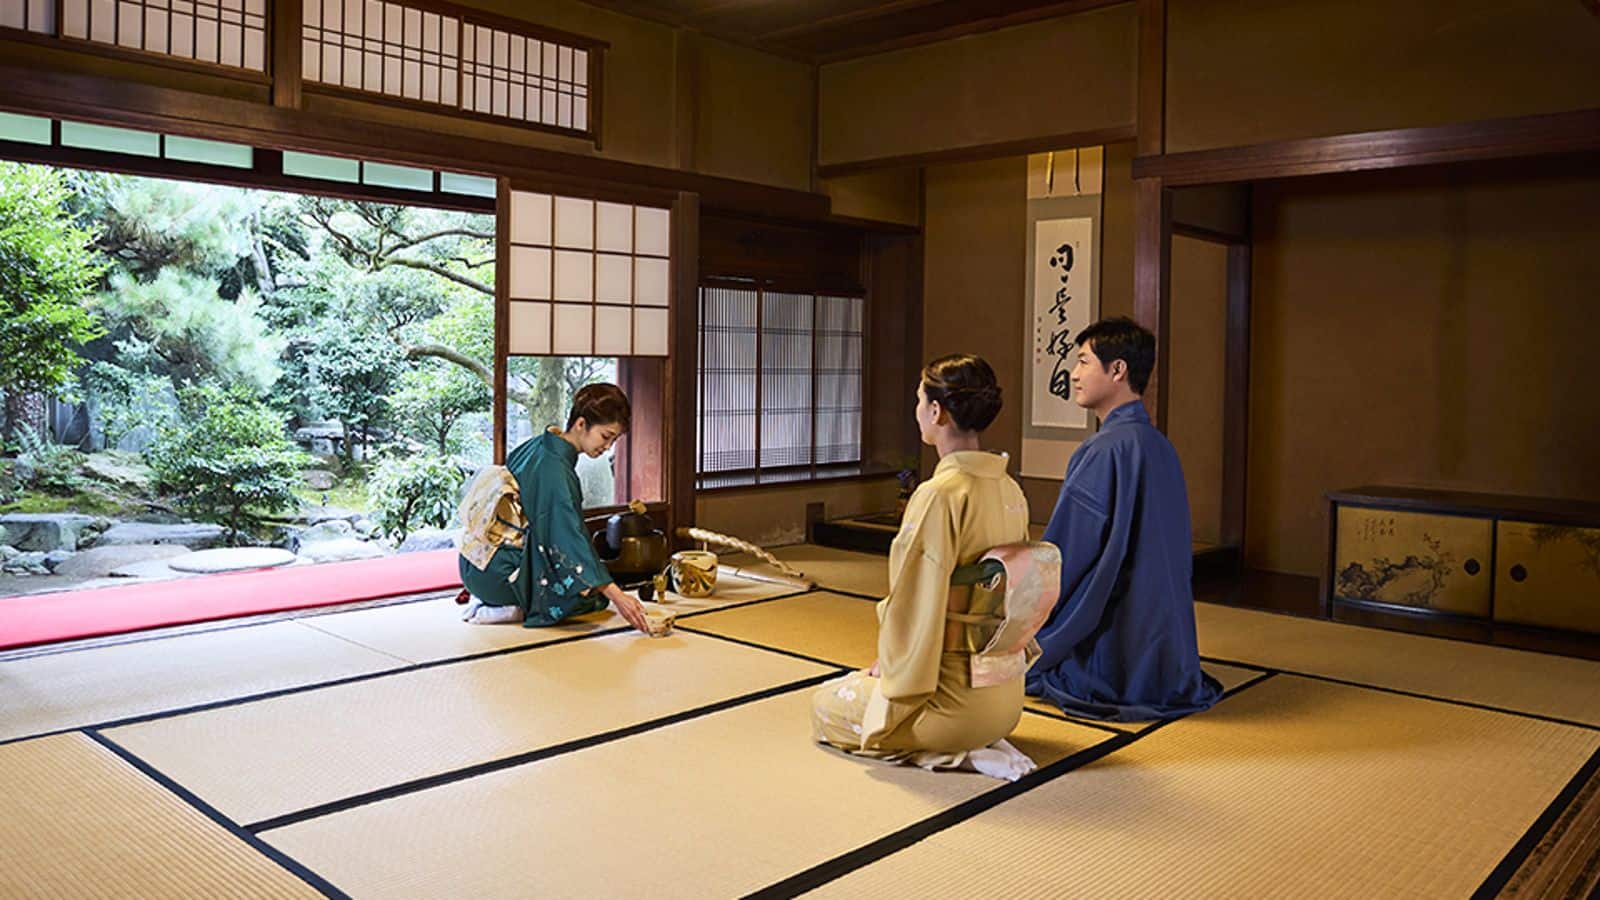 Tap into Kyoto's timeless tea ceremony traditions